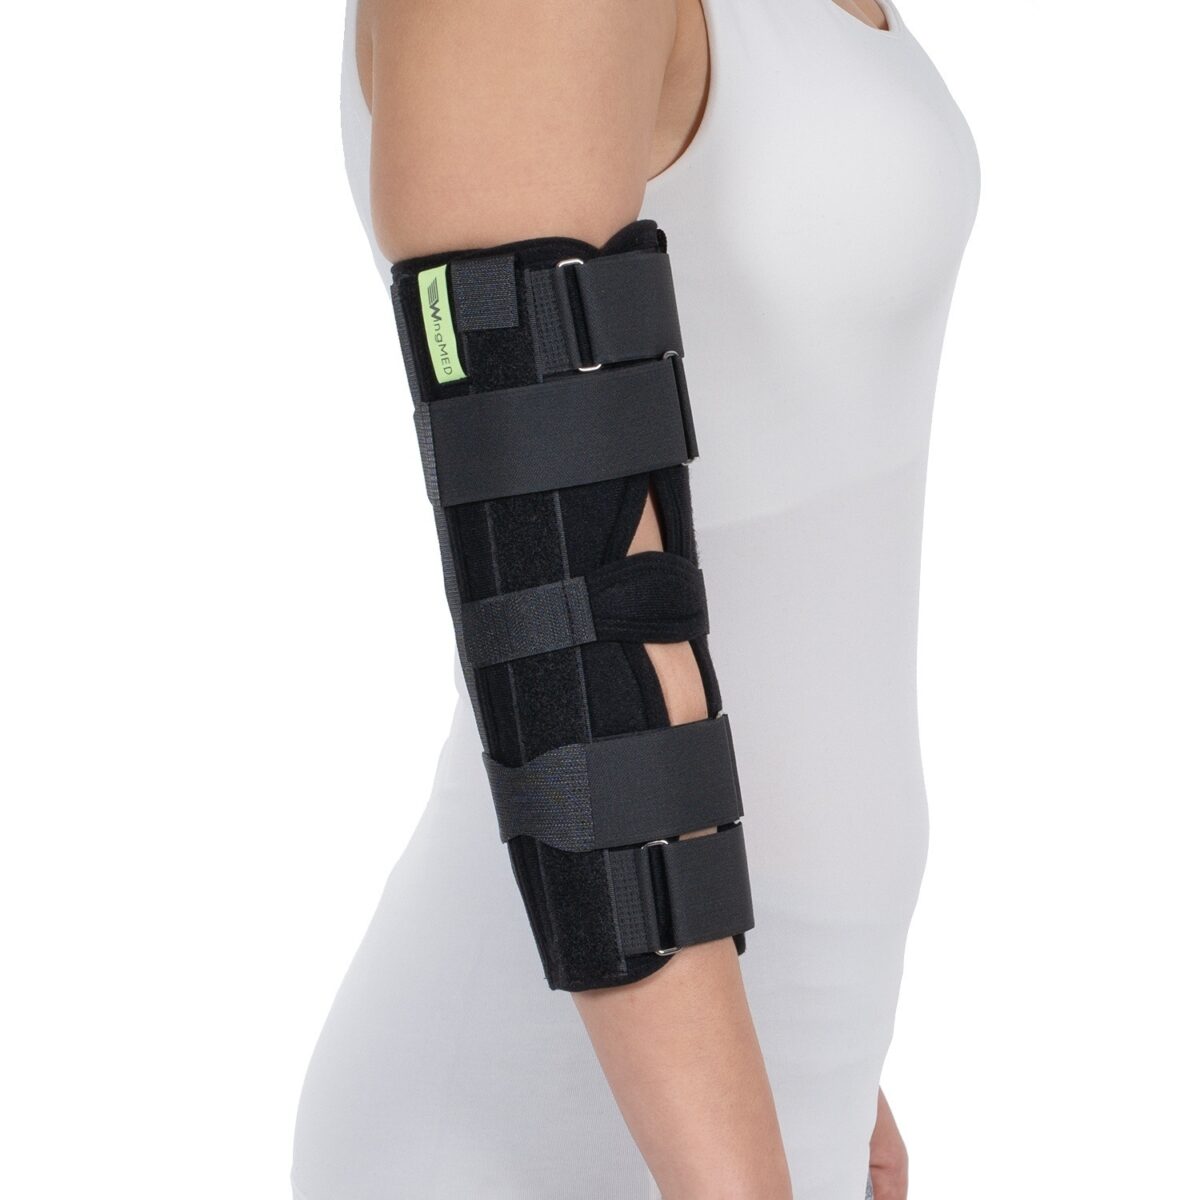 wingmed orthopedic equipments W207 elbow immobilizer 5